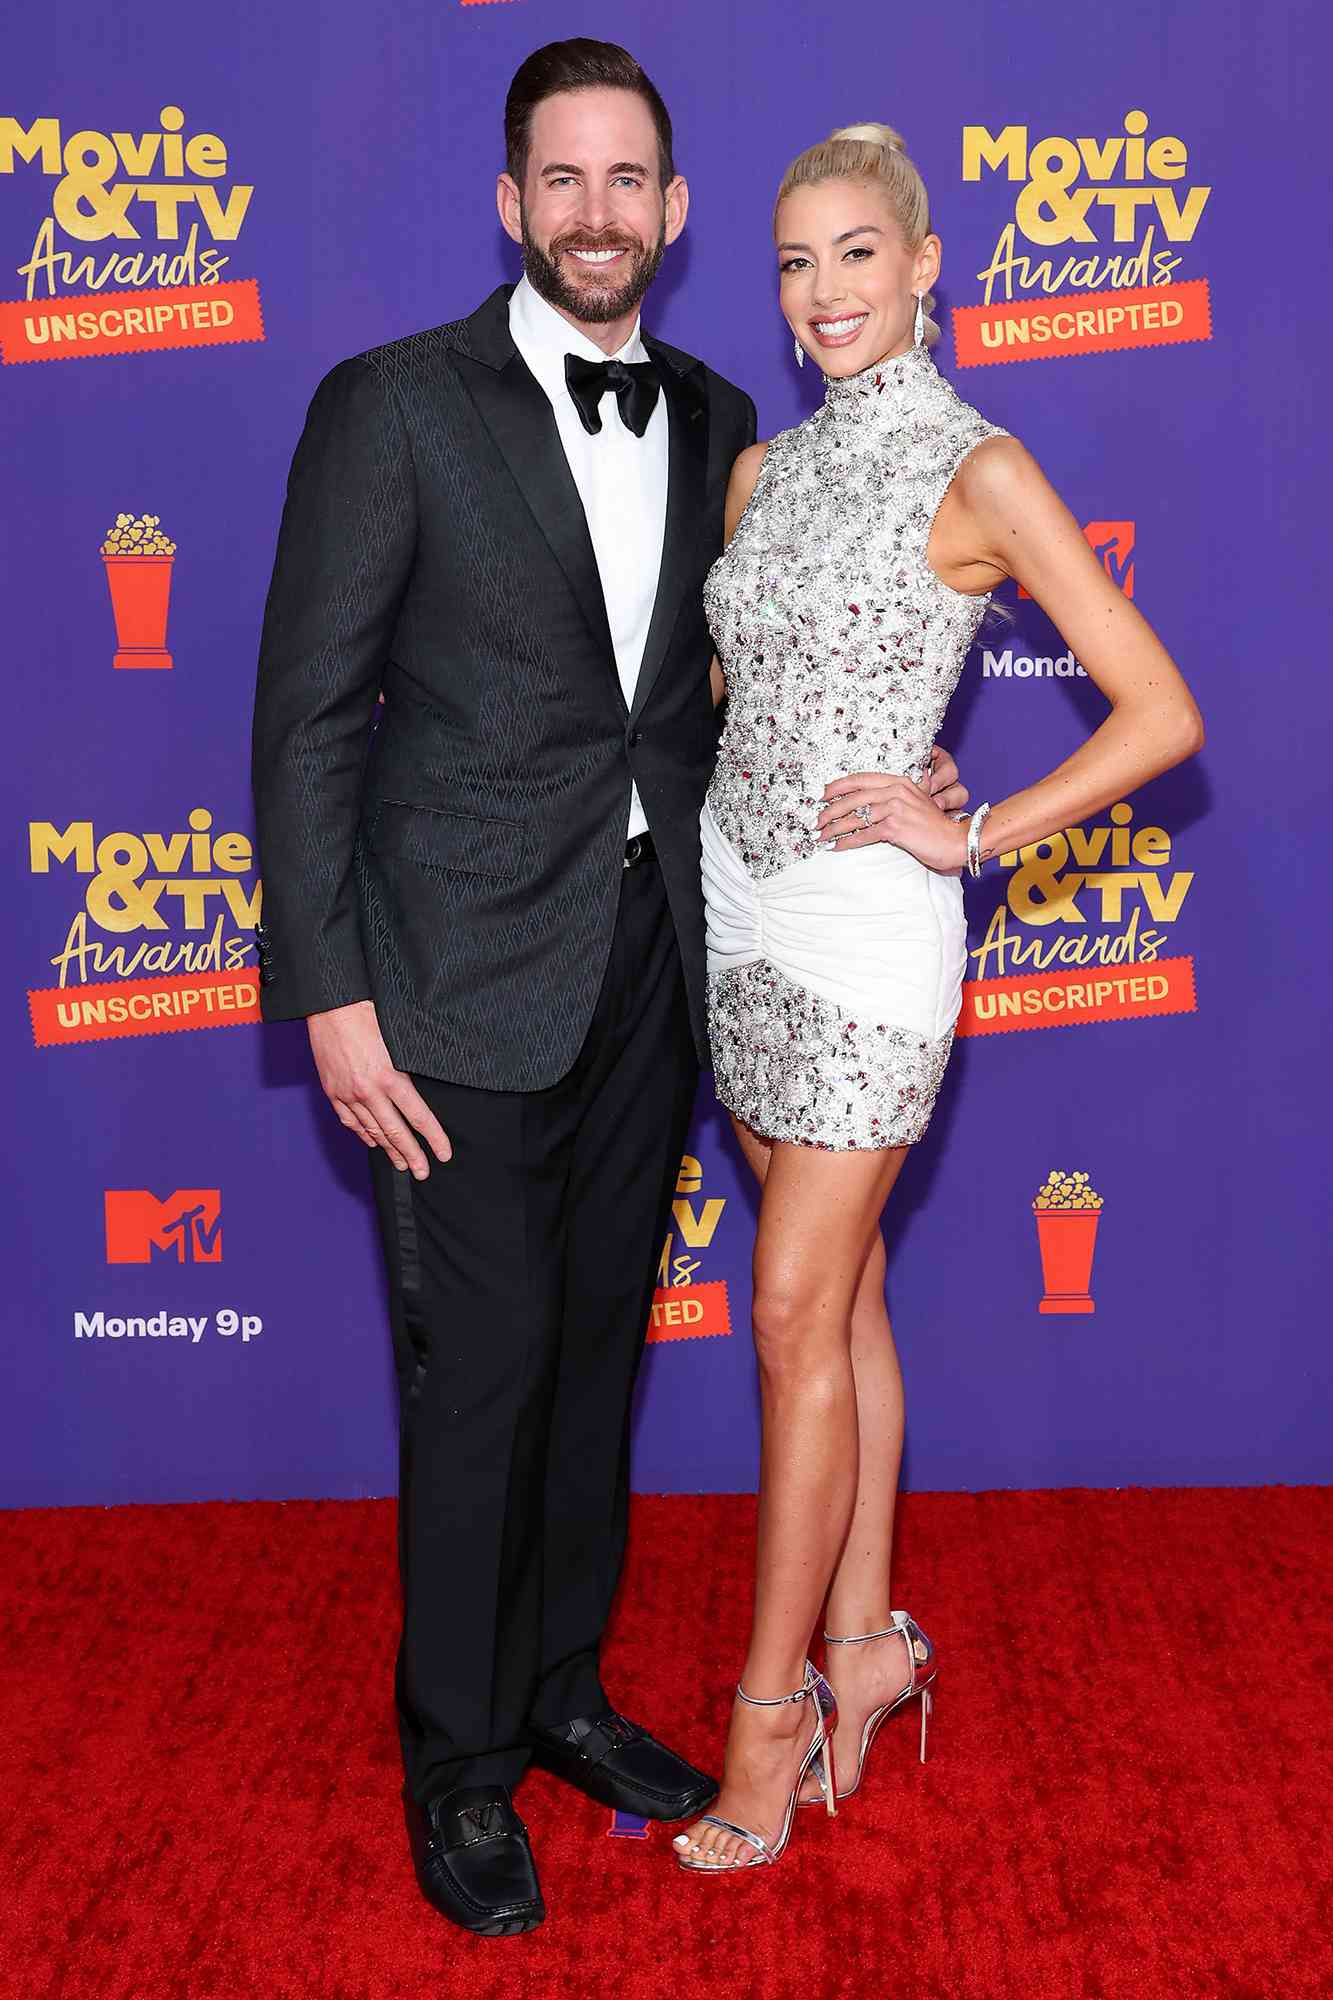 Tarek El Moussa and Heather Rae Young -- 2021 MTV Movie & TV Awards: UNSCRIPTED - Arrivals